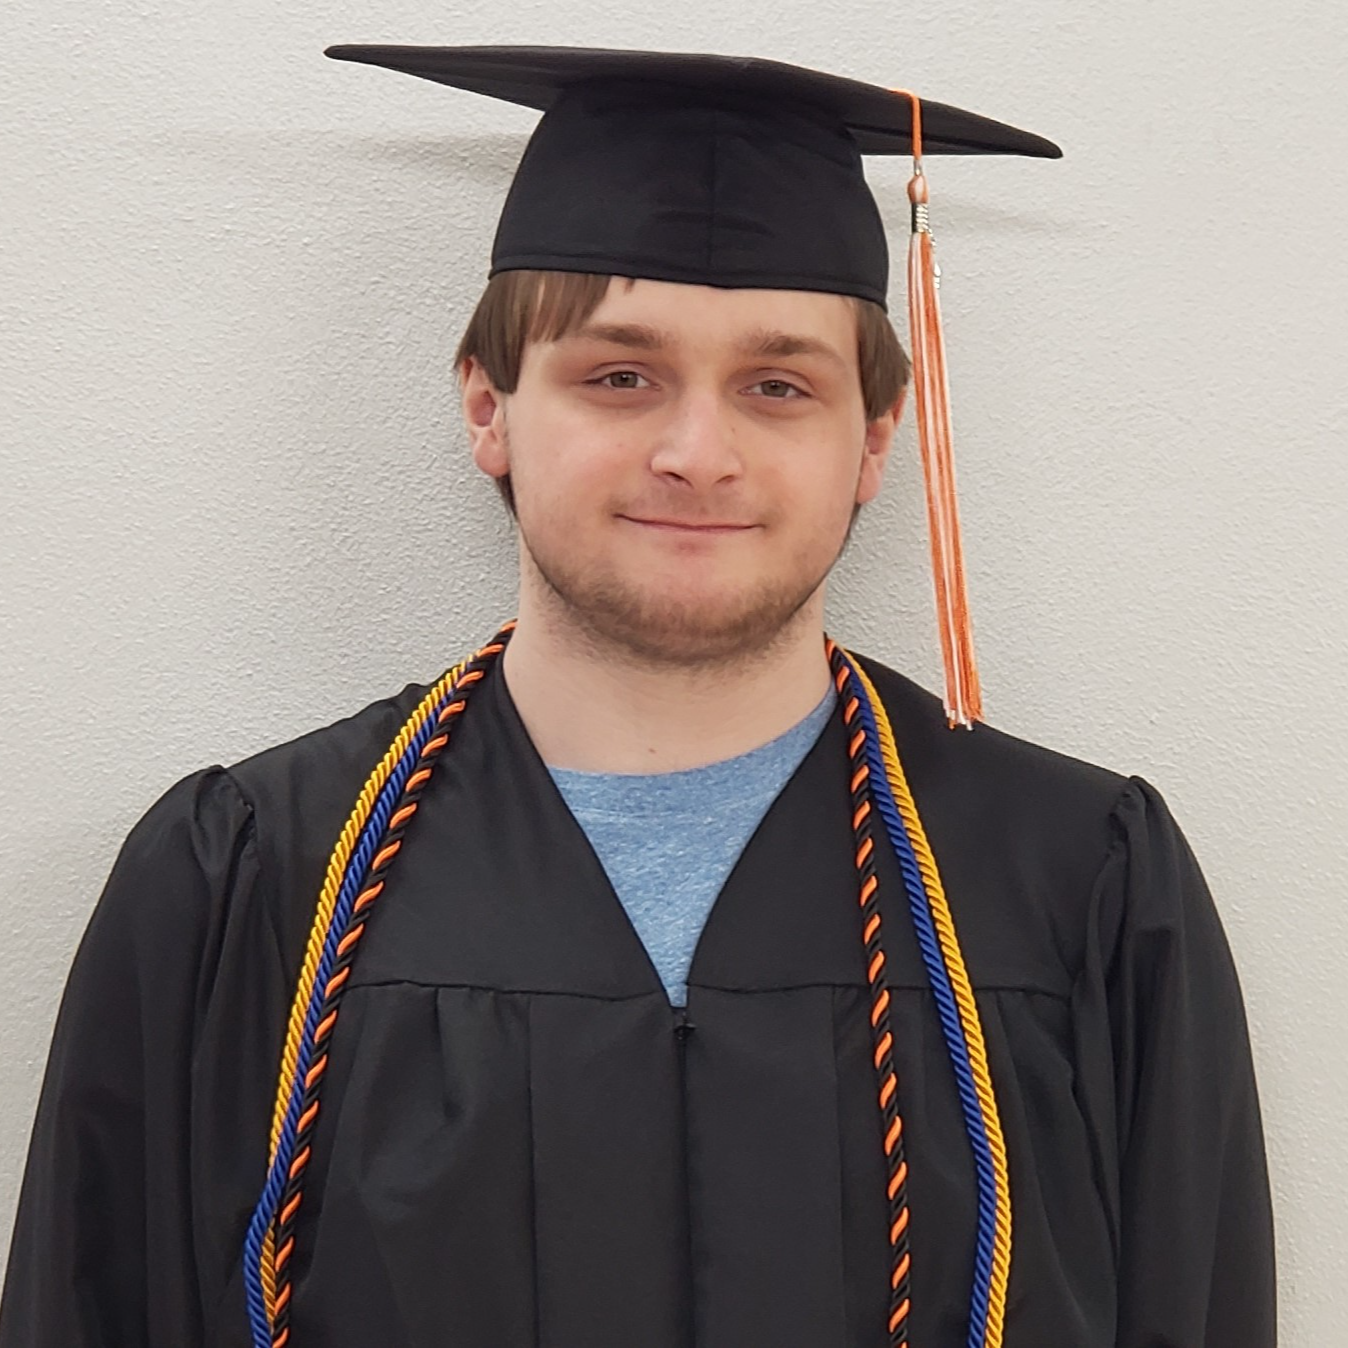 Young man with brown hair wearing a black graduation cap & gown with blue & gold and orange & black cords